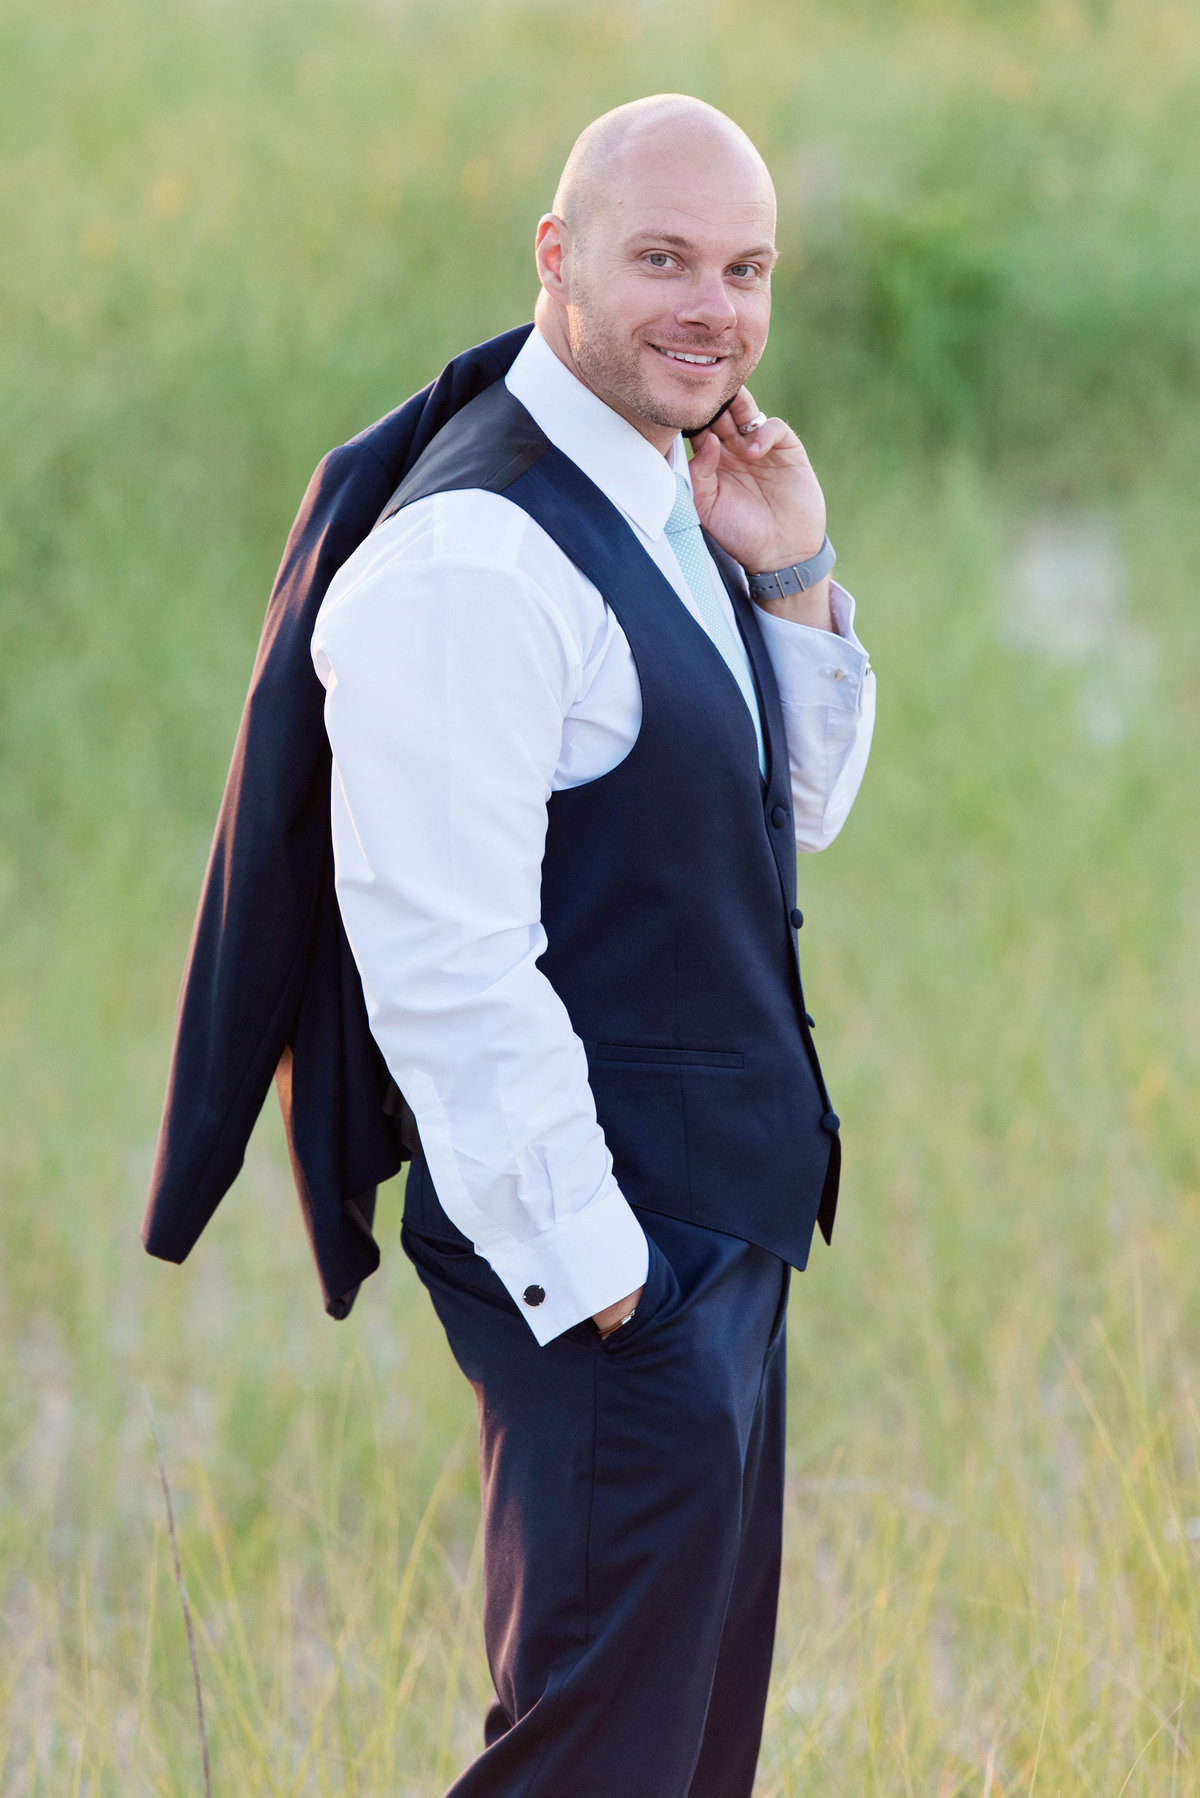 photo of groom holding his tuxedo jacket over his shoulder on the beach from wedding reception at Pavilion at Sunken Meadow